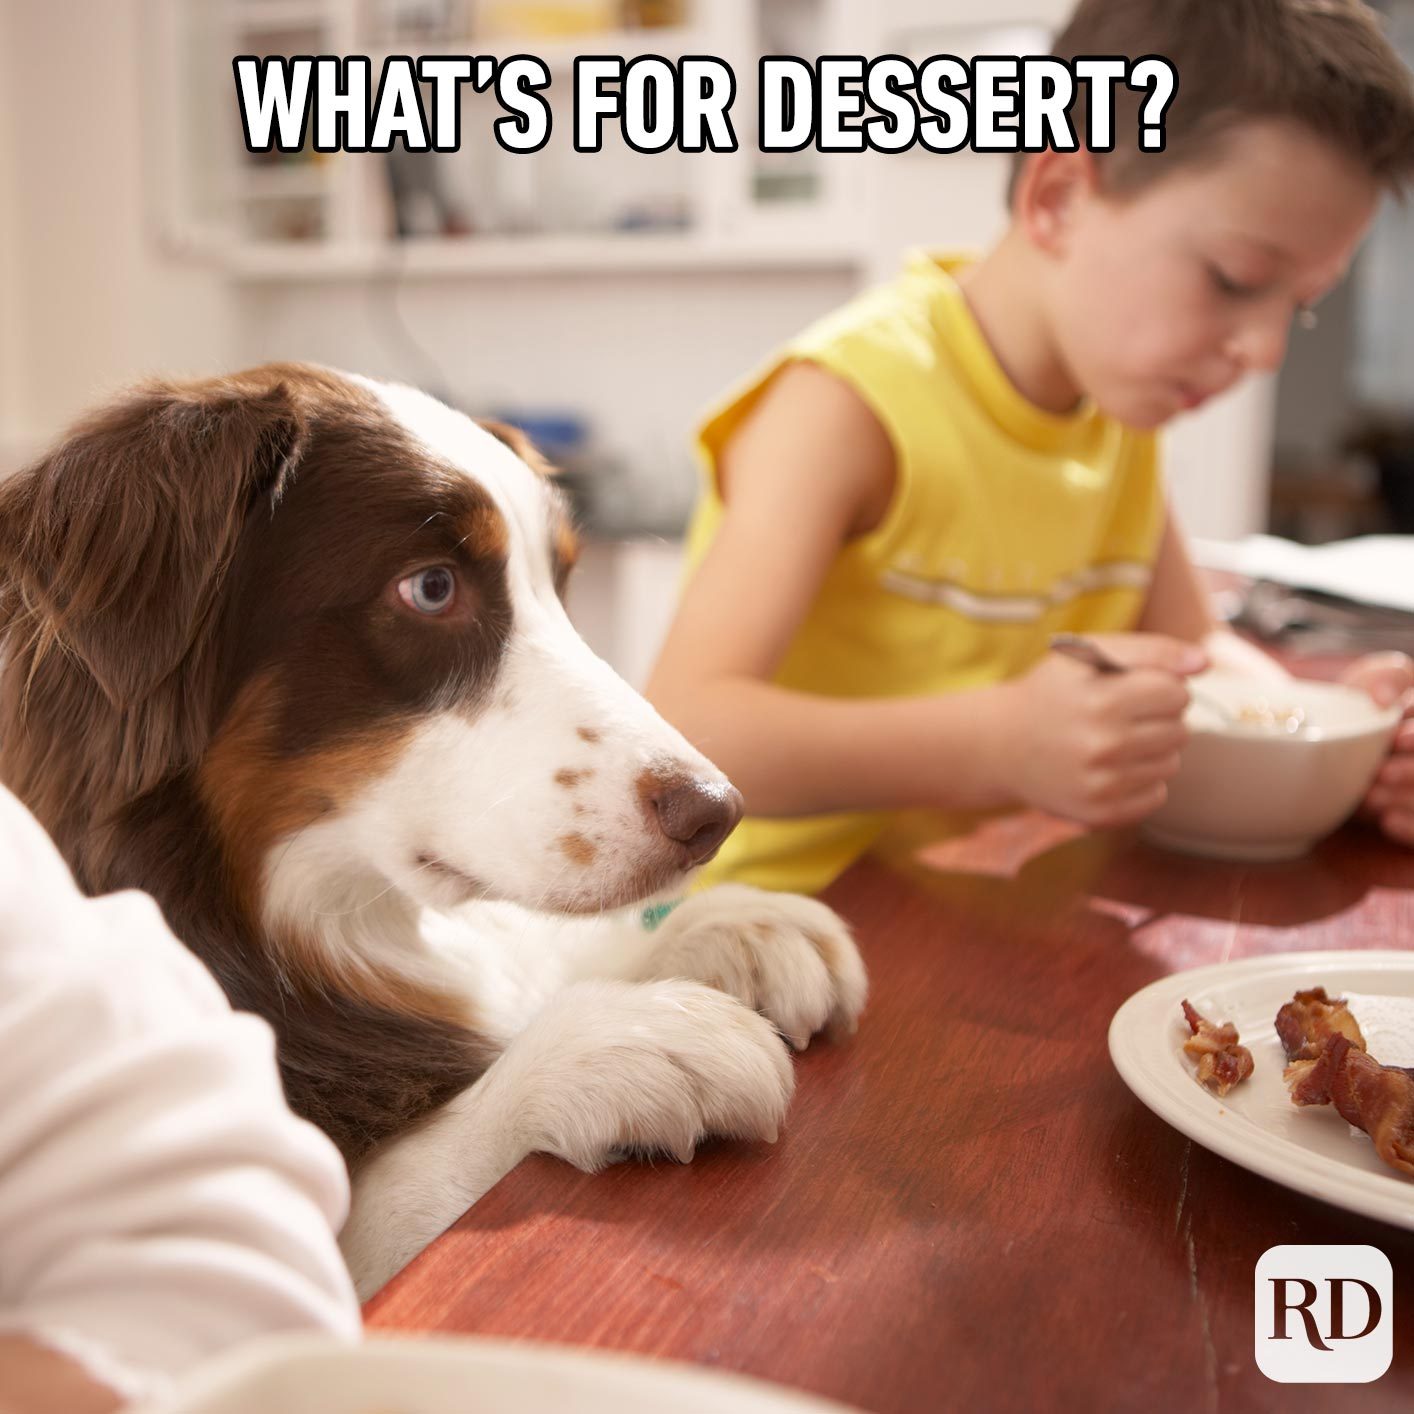 Dog at the dinner table staring at bacon.Meme text: What's for dessert?